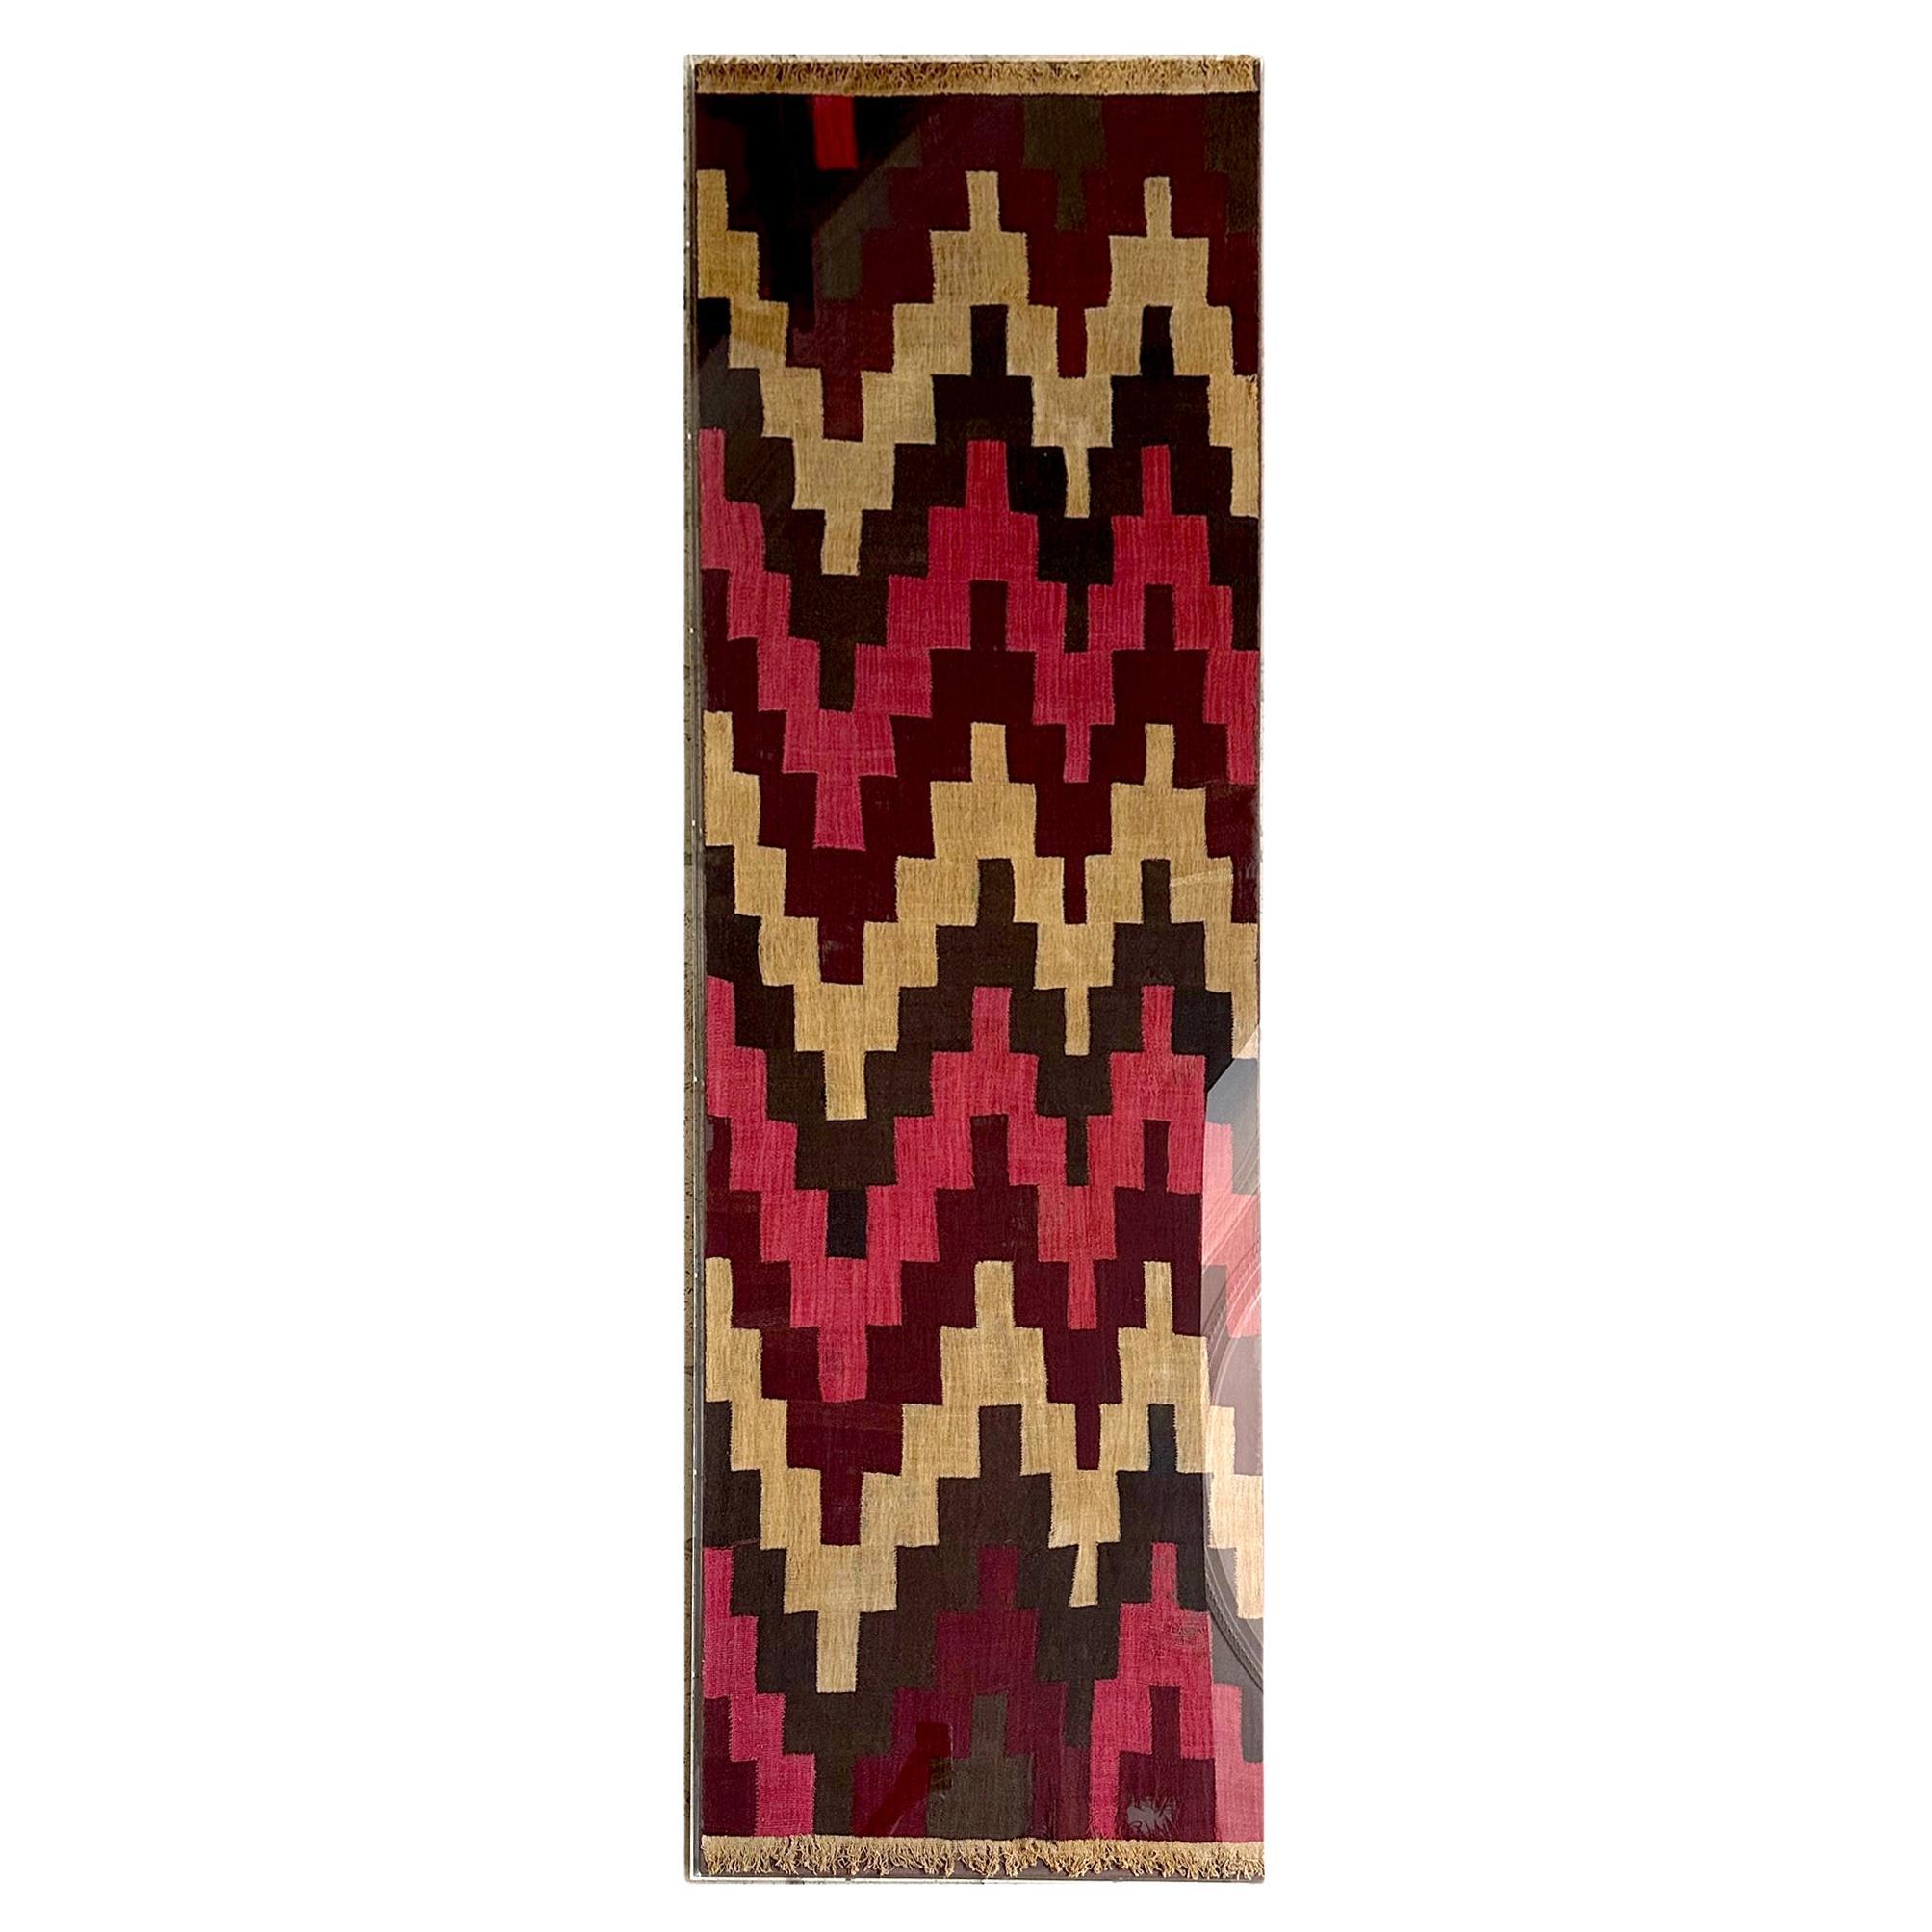 Framed Large Nazca Textile Panel with Geometrical Design